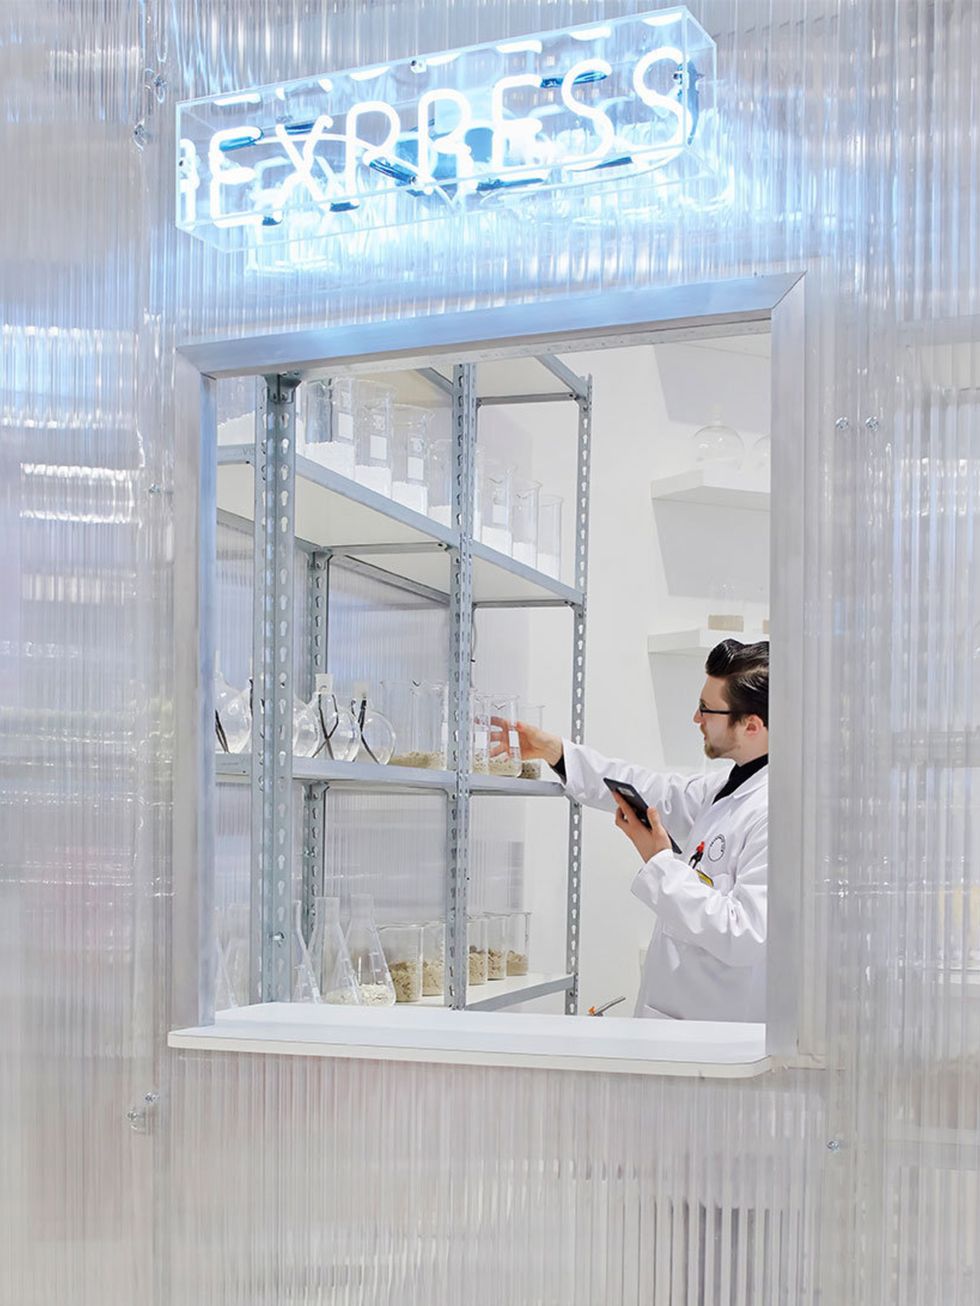 &lt;p&gt;&lt;strong&gt;BEAUTY: The Fragrance Lab at Selfridges&lt;/strong&gt;&lt;/p&gt;&lt;p&gt;Pay a visit to Selfridges&#039; Fragrance Lab and finding The One for your dressing table becomes a delightfully straightforward affair.&lt;/p&gt;&lt;p&gt;The 